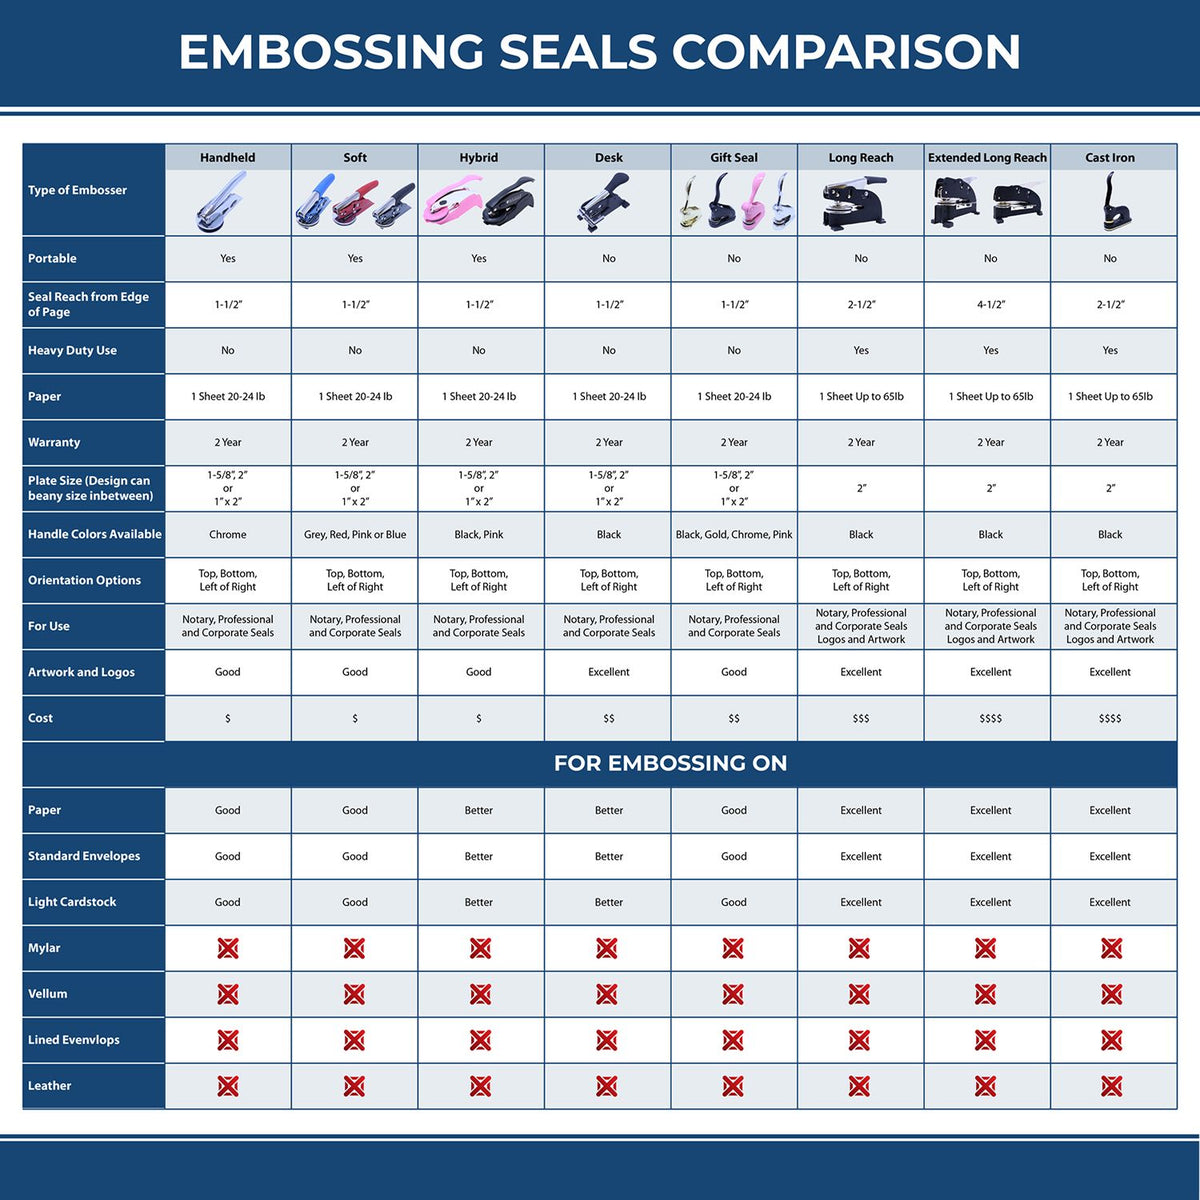 A comparison chart for the different types of mount models available for the State of Hawaii Soft Land Surveyor Embossing Seal.